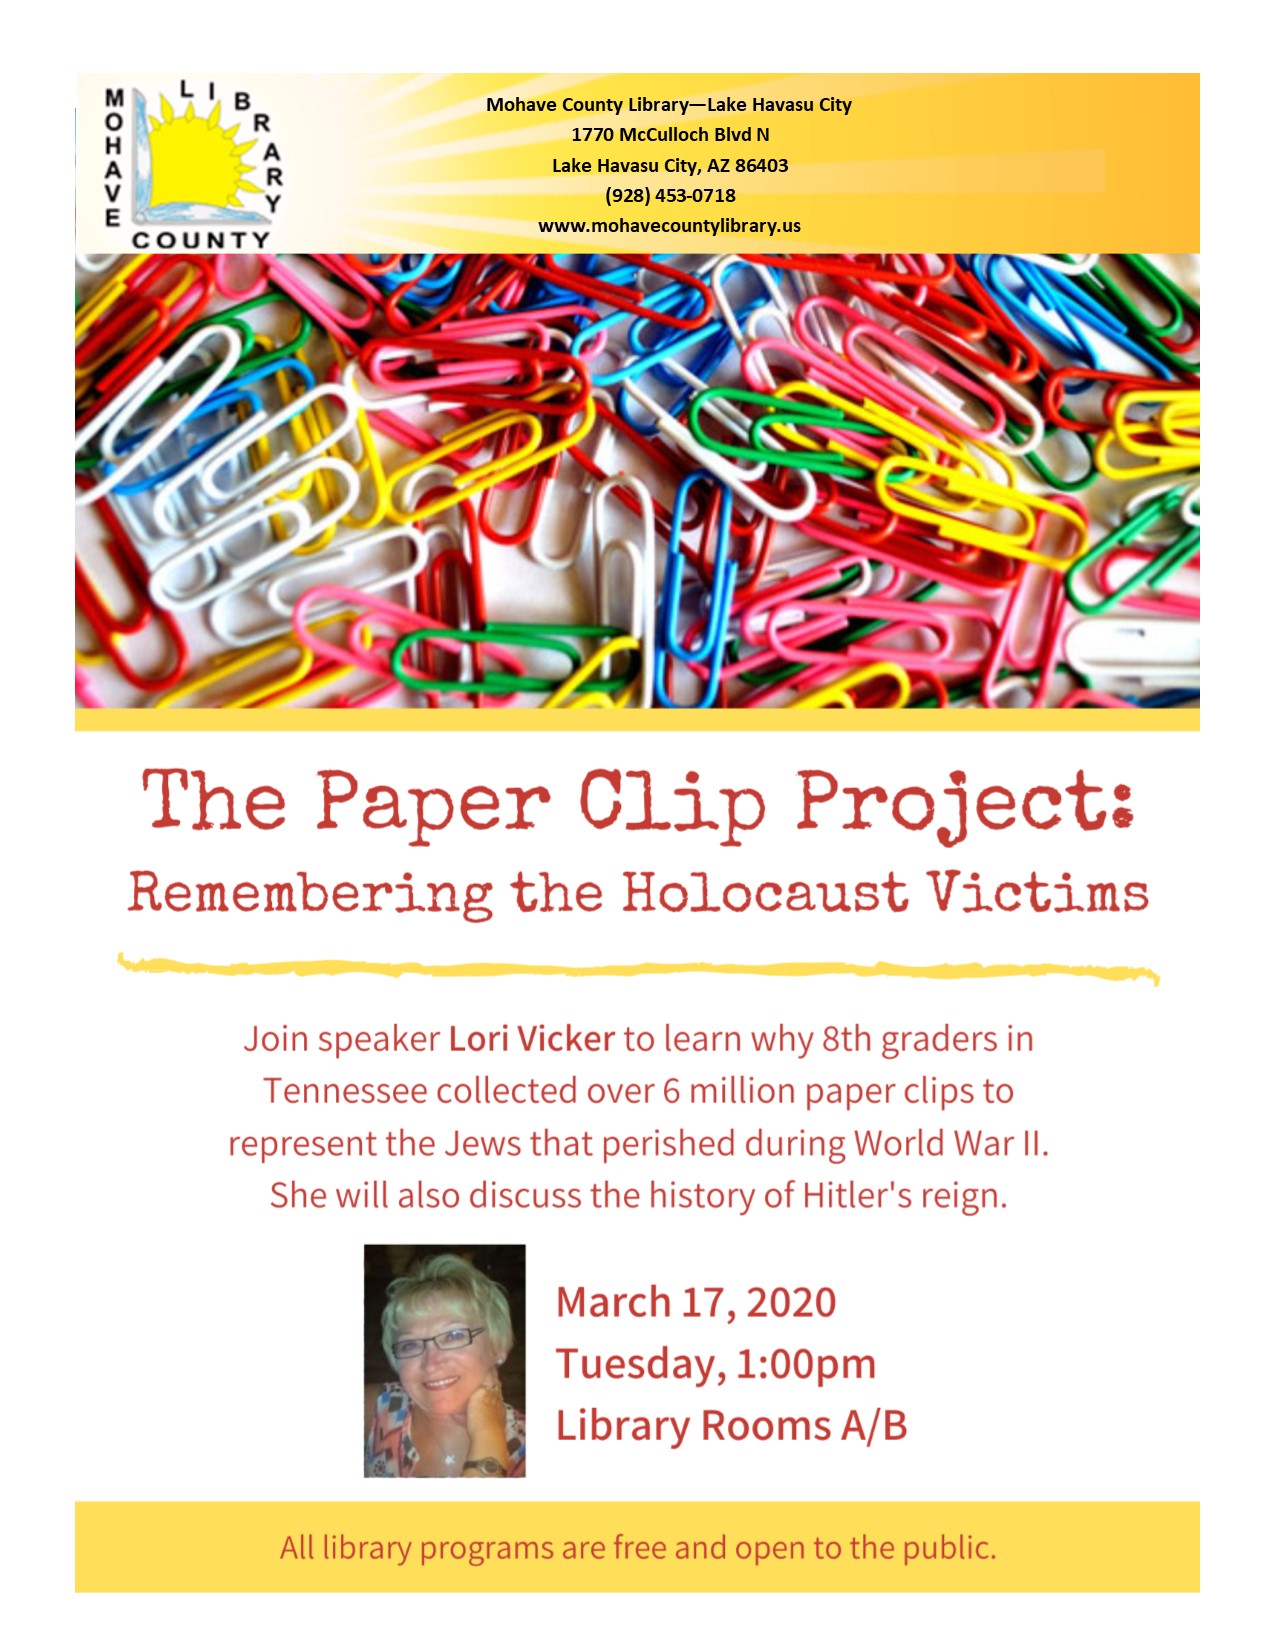 The Paper Clip Project is now cancelled